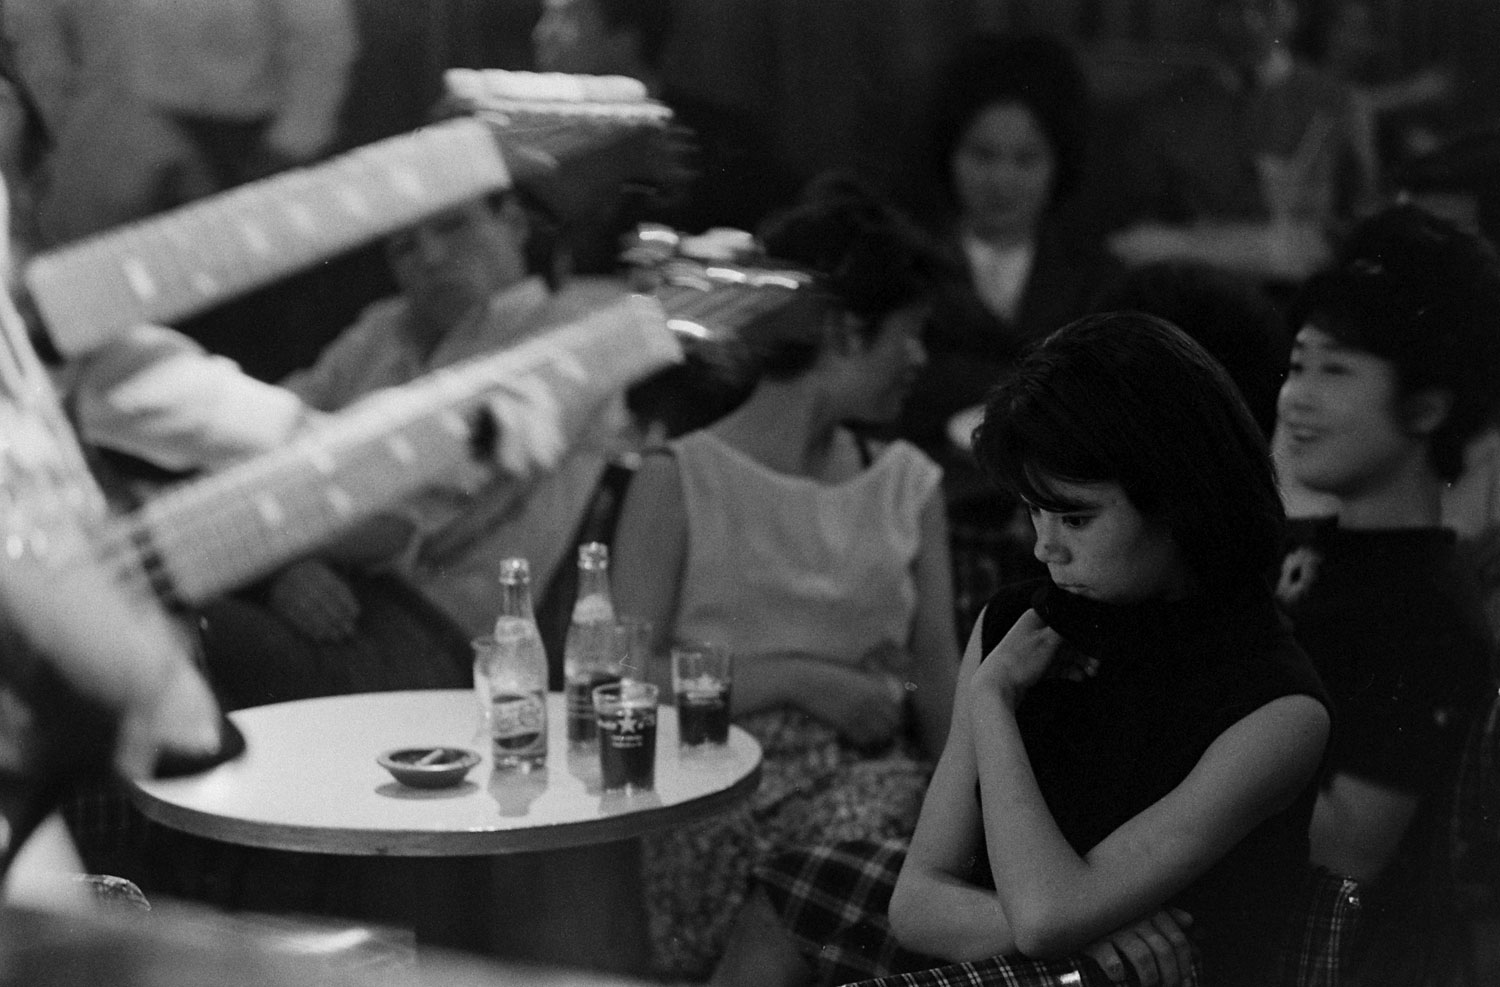 Lost in the music, Tokyo, 1964.